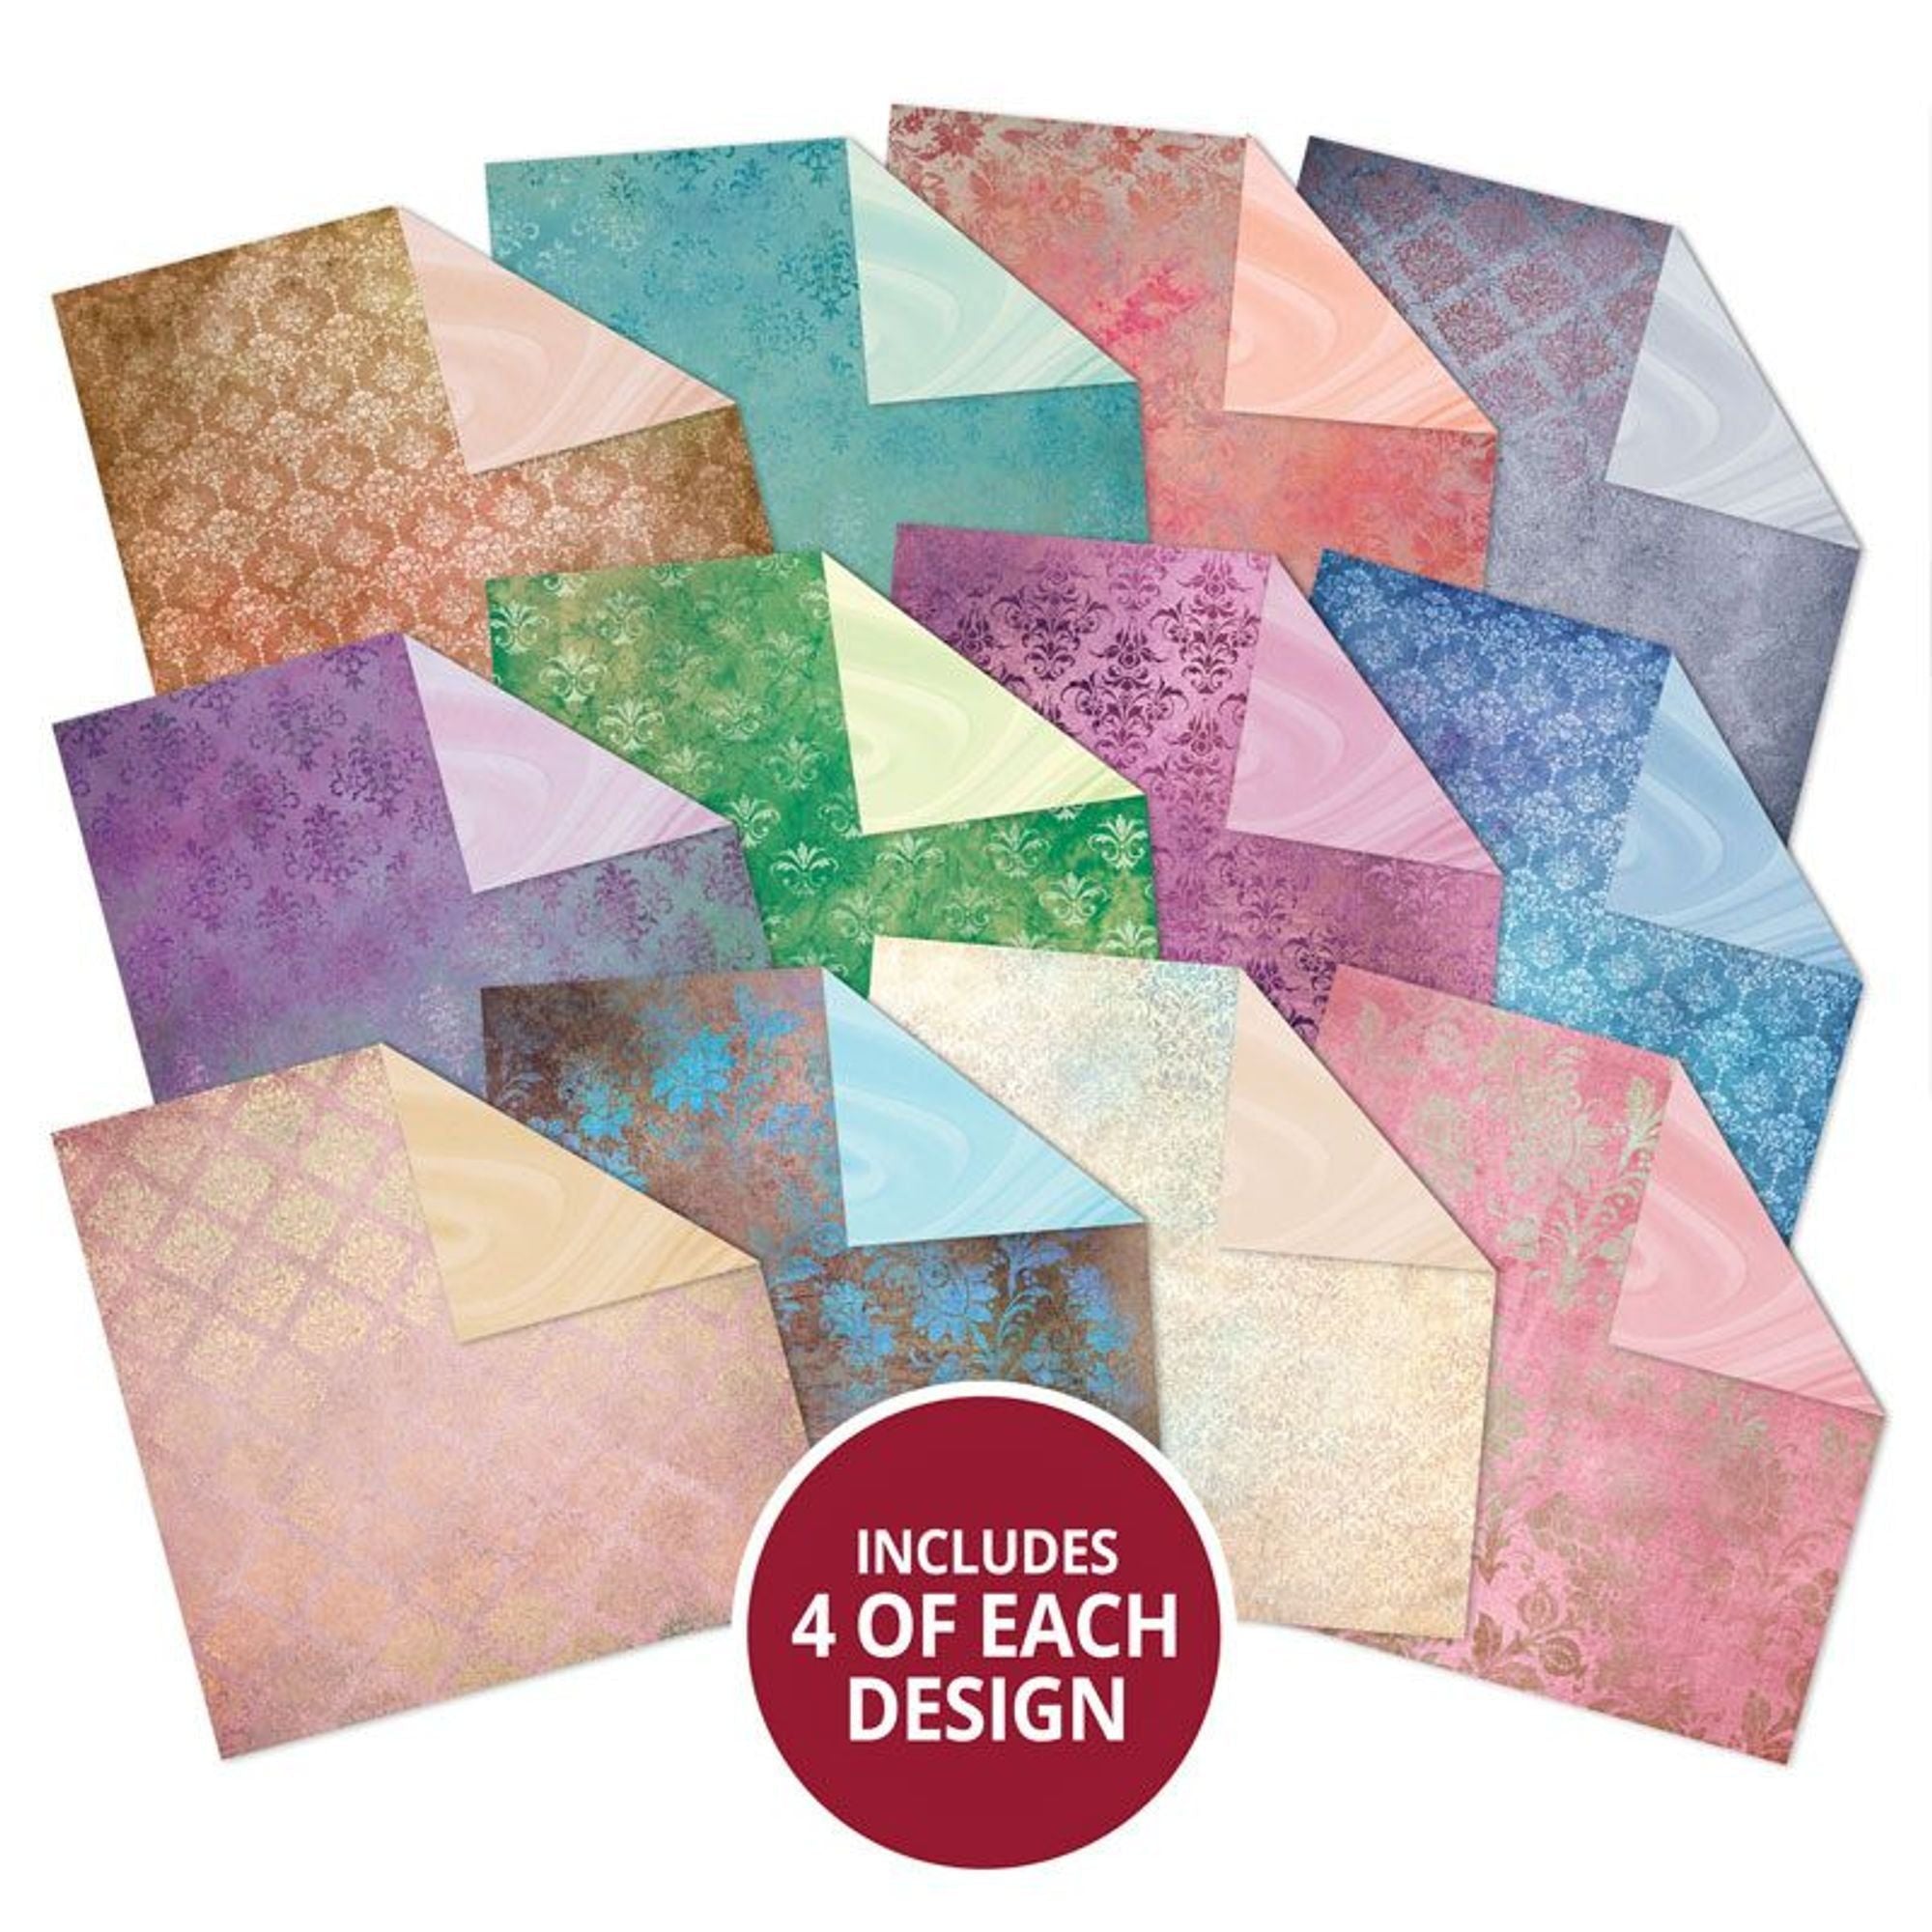 Duo Design Paper Pad - Delicate Damasks & Soft Marbles